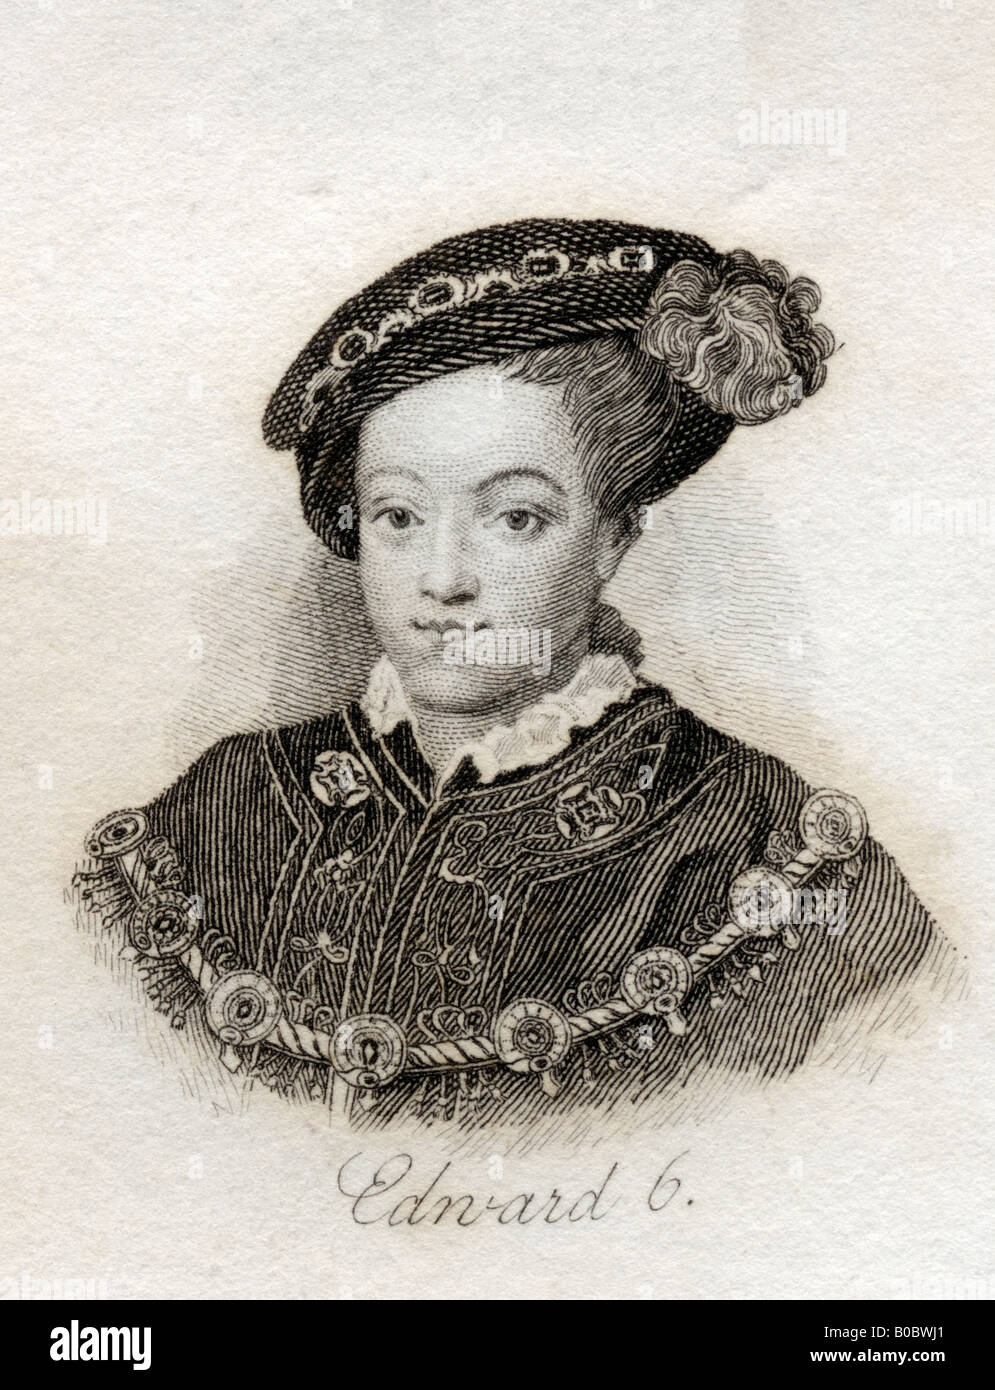 Edward VI, 1537 - 1553. King of England and Ireland. From the book Crabbs Historical Dictionary, published 1825. Stock Photo